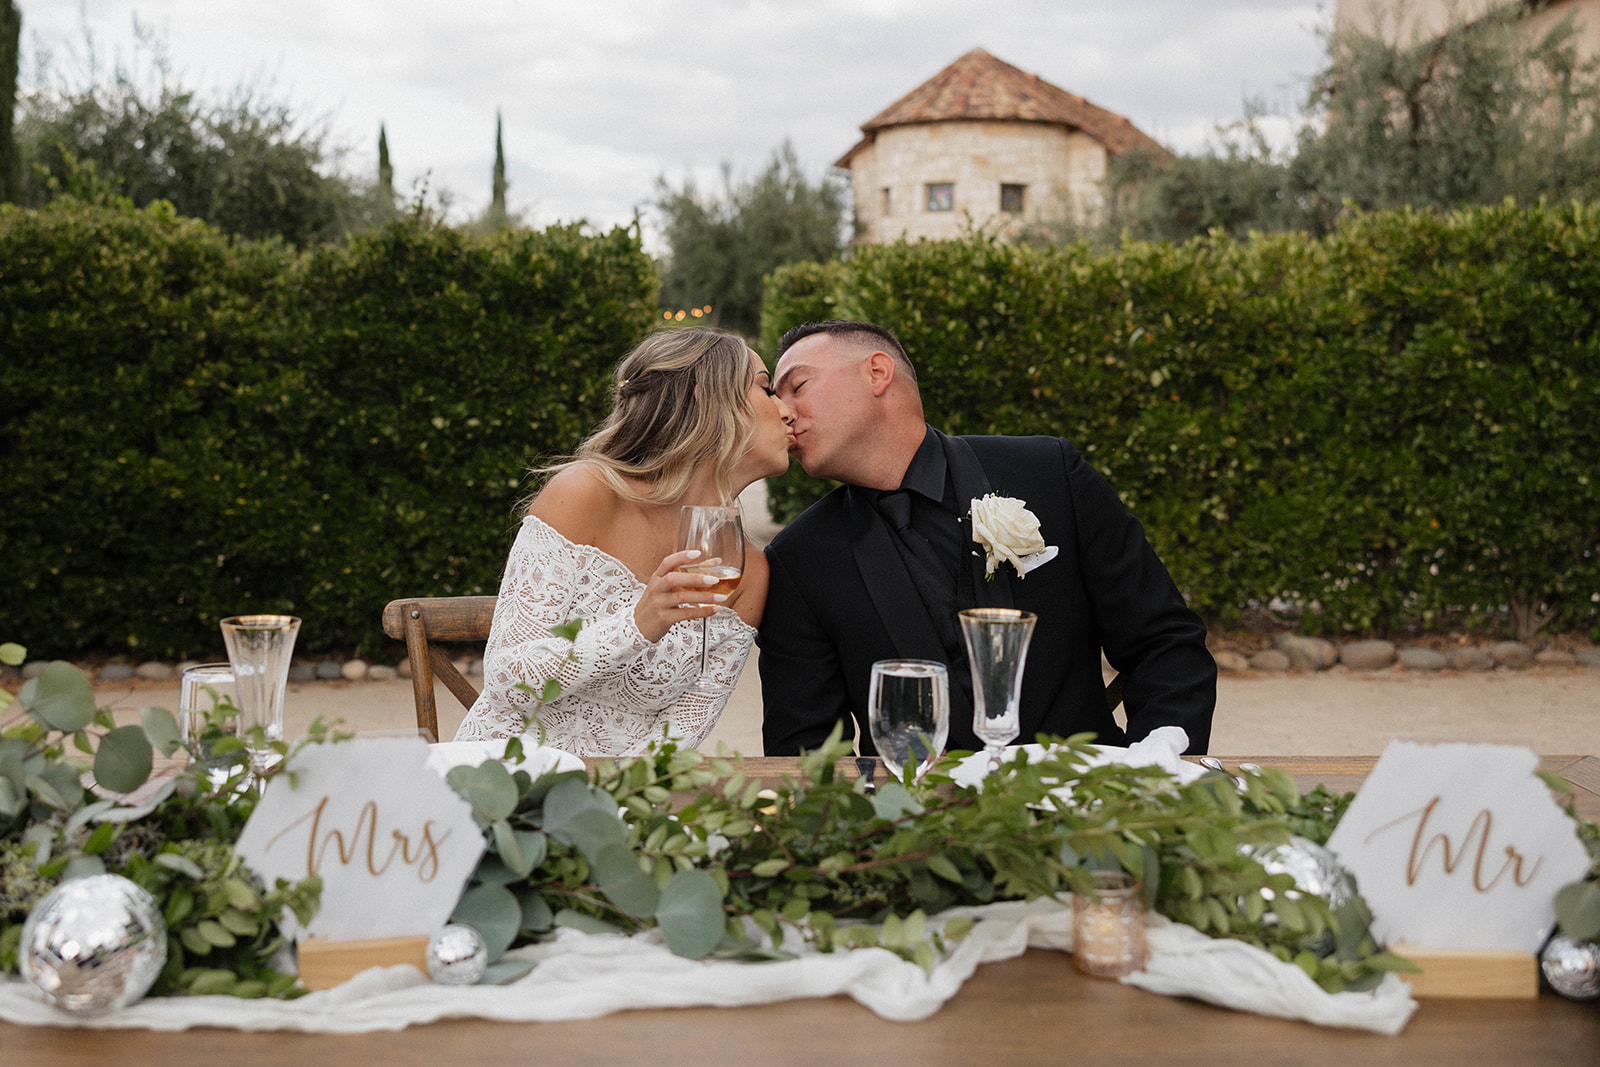 bride and groom kissing during dinner at their wedding reception